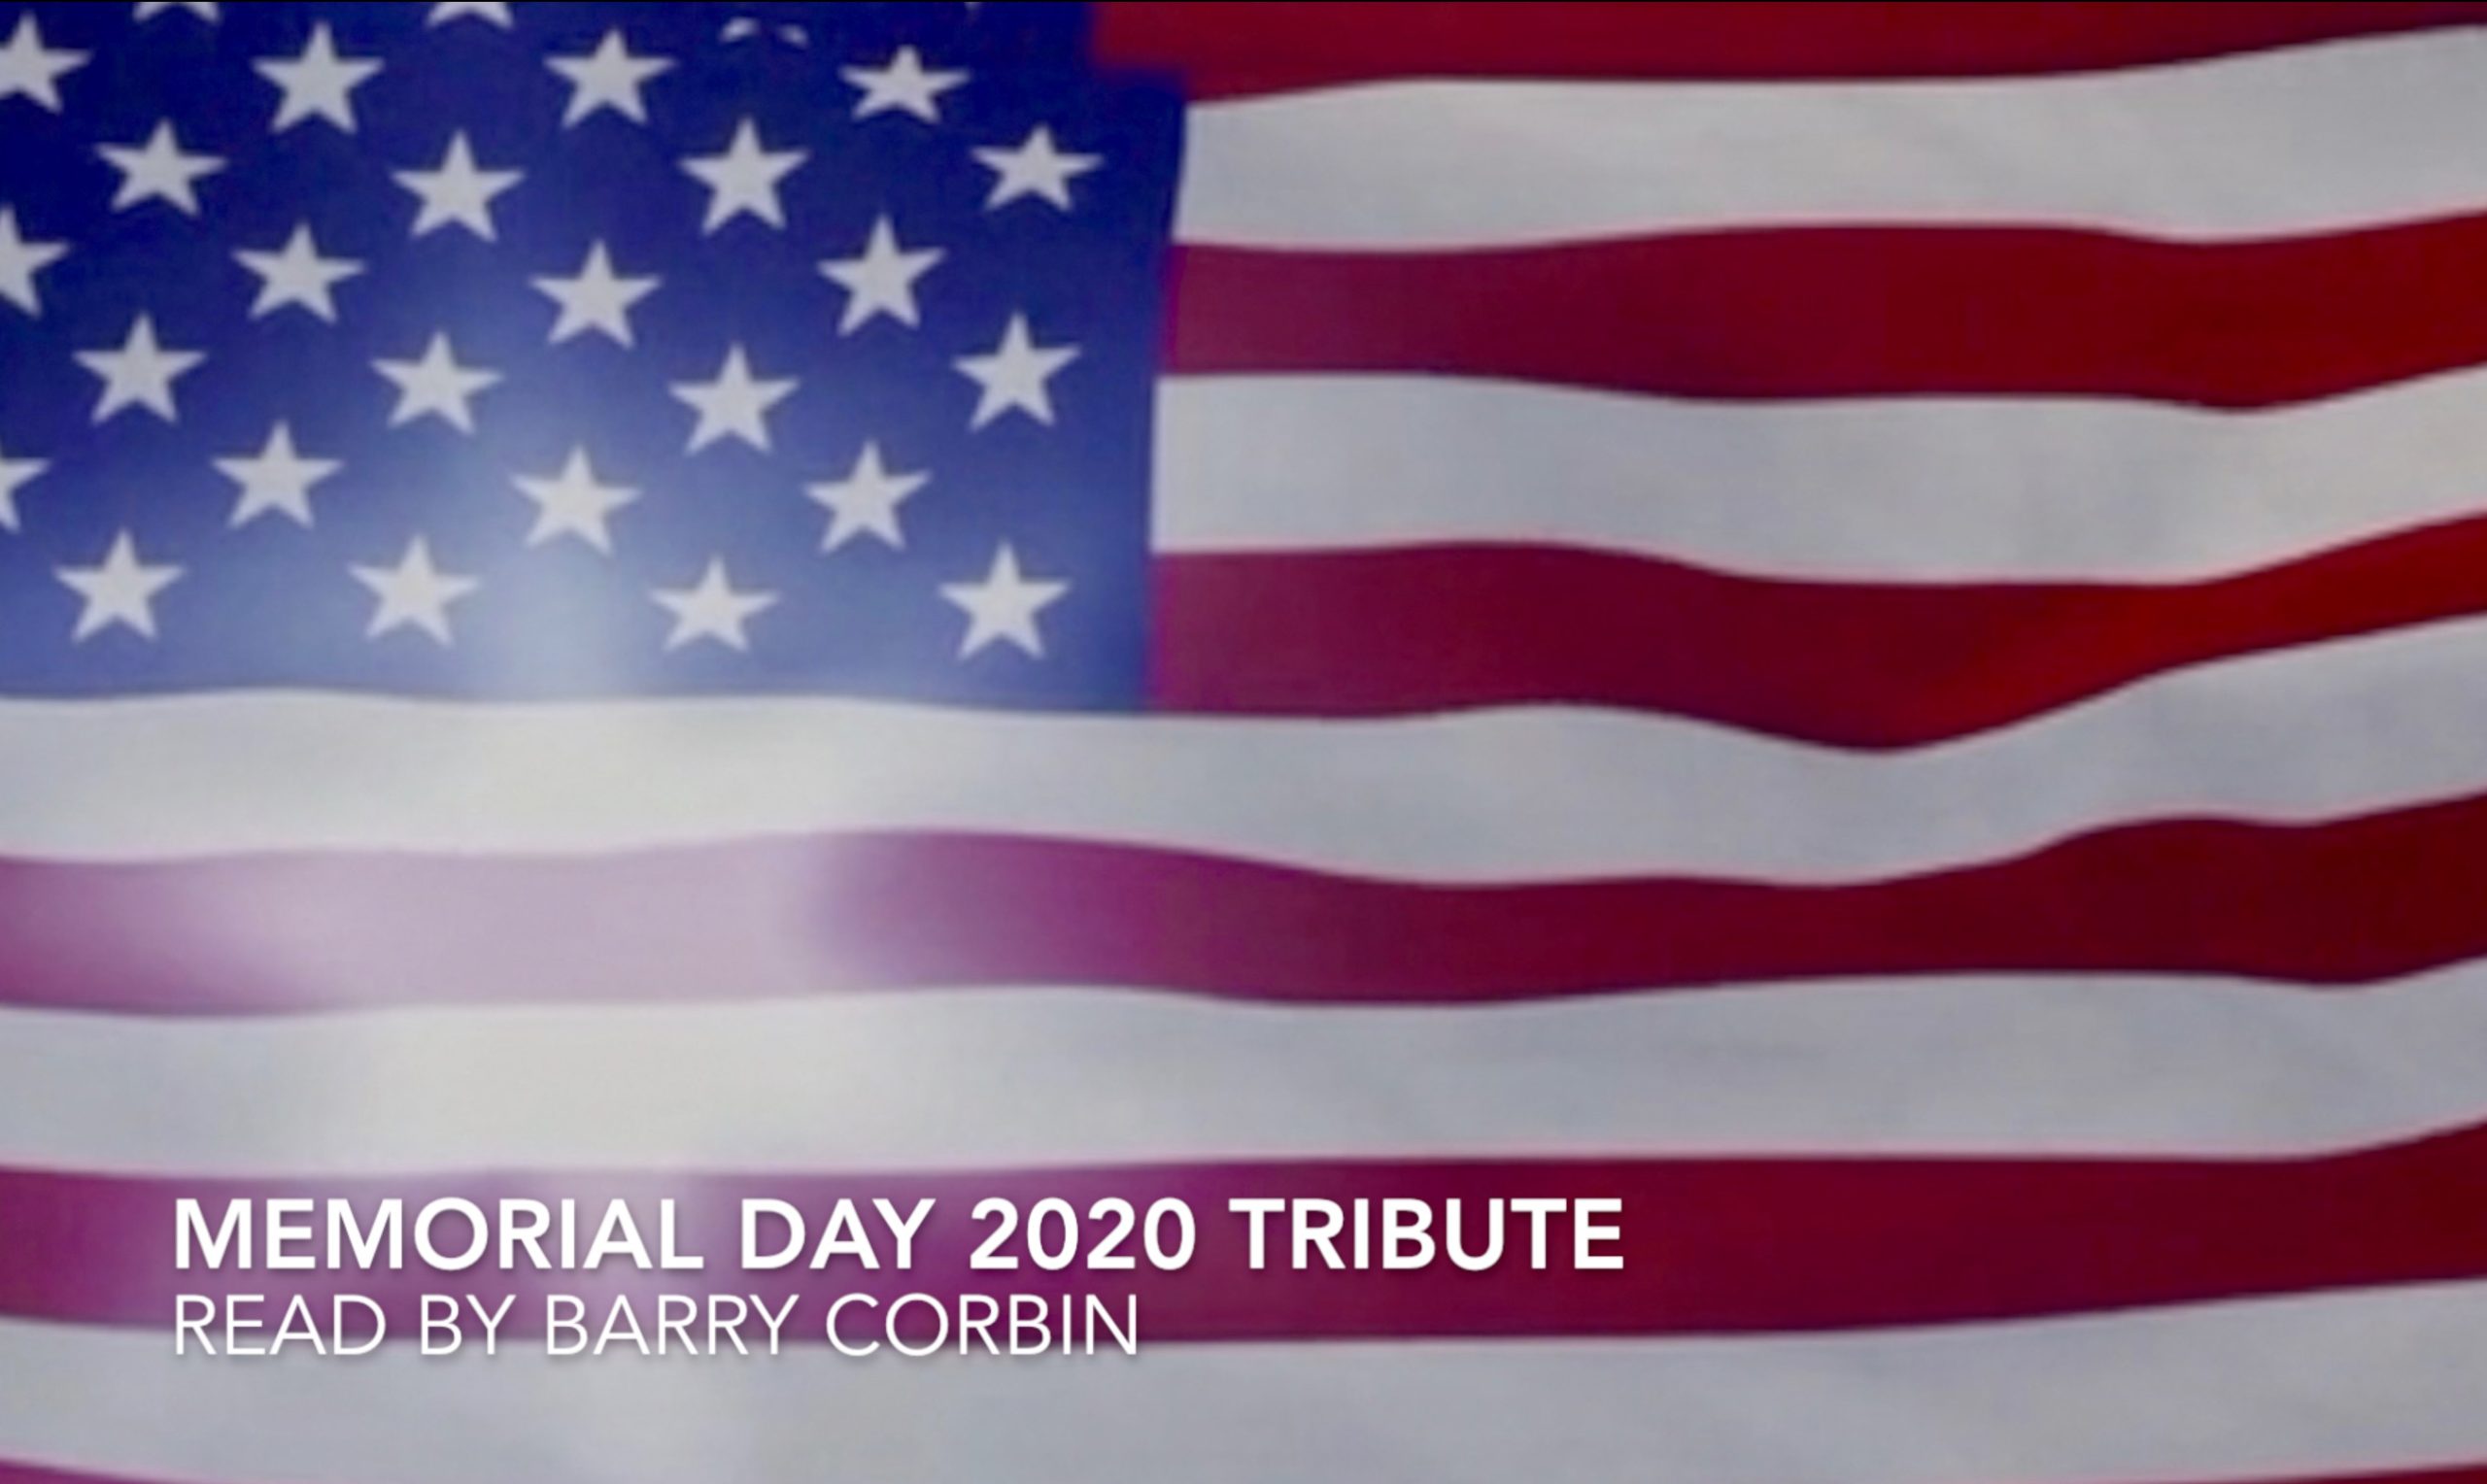 “More Life with Jody Dean”: The Memorial Day 2020 Tribute, with Barry Corbin